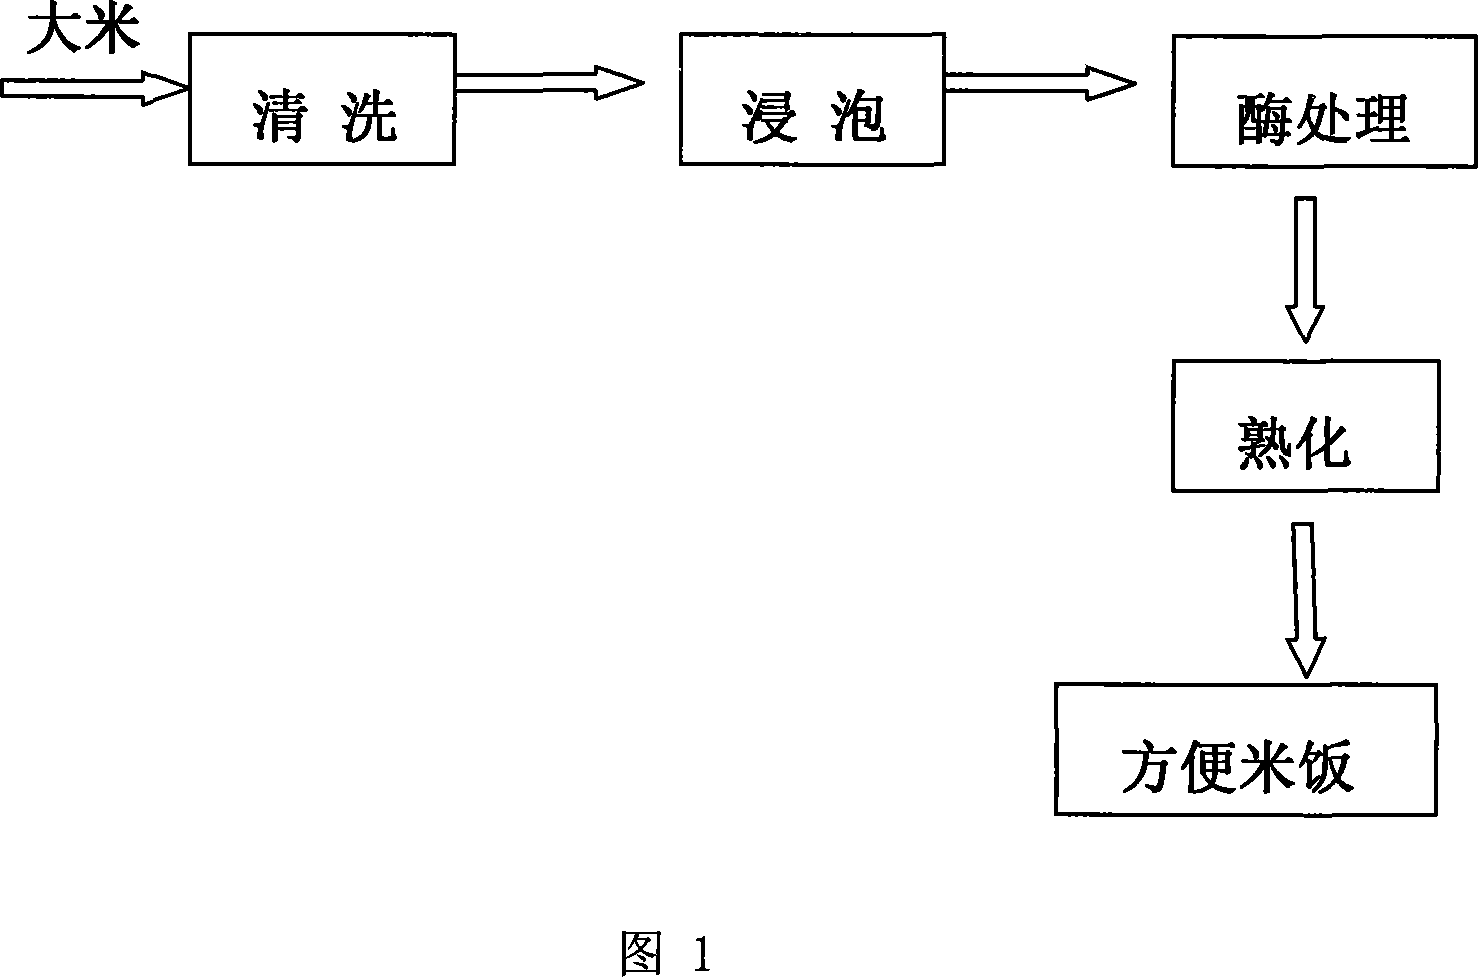 Method for producing instant rice